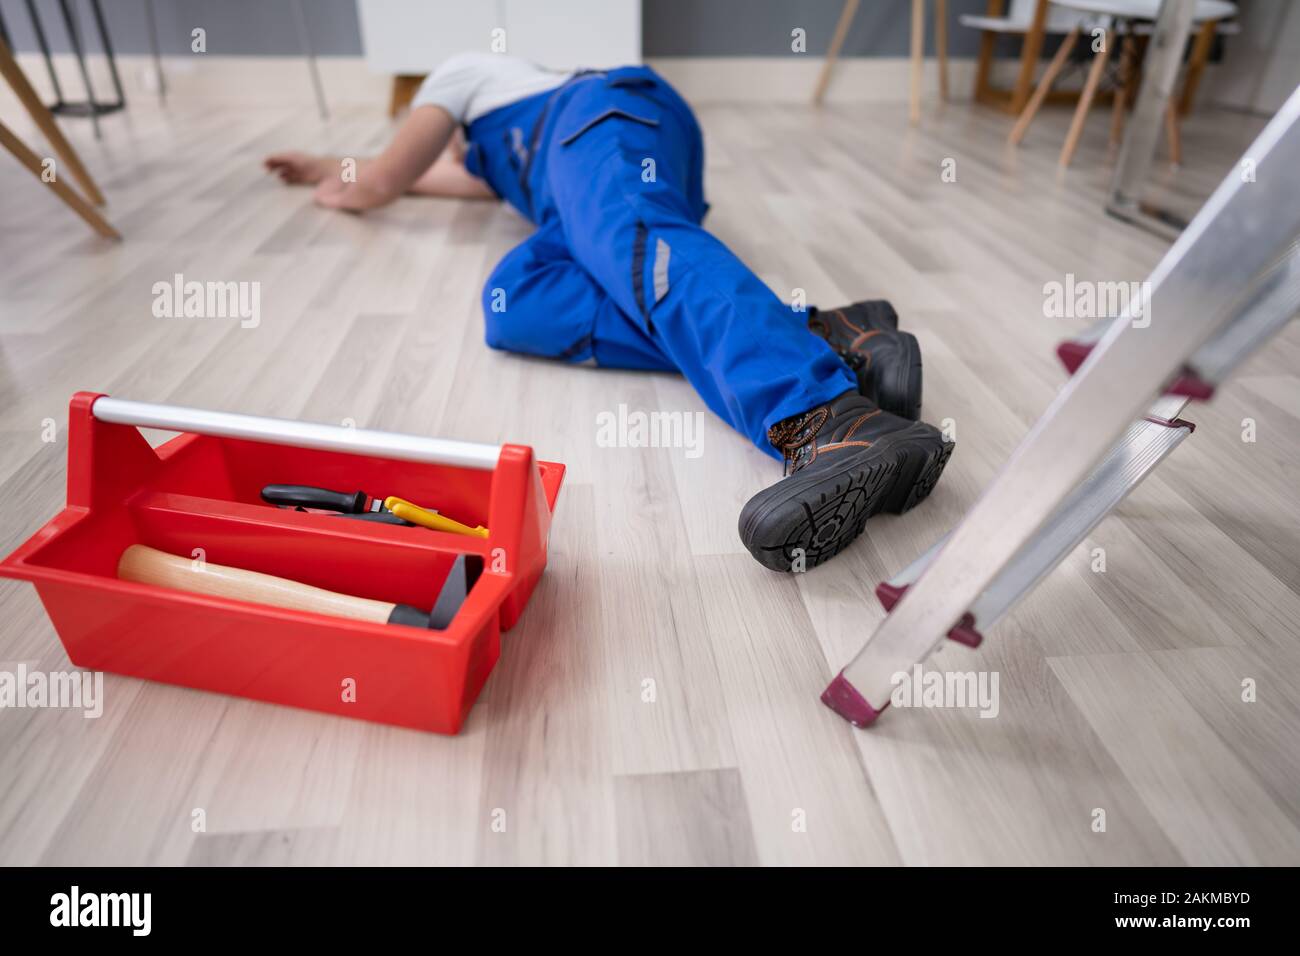 Unconscious Handyman Fallen From Ladder With Equipment Lying On Floor Stock Photo